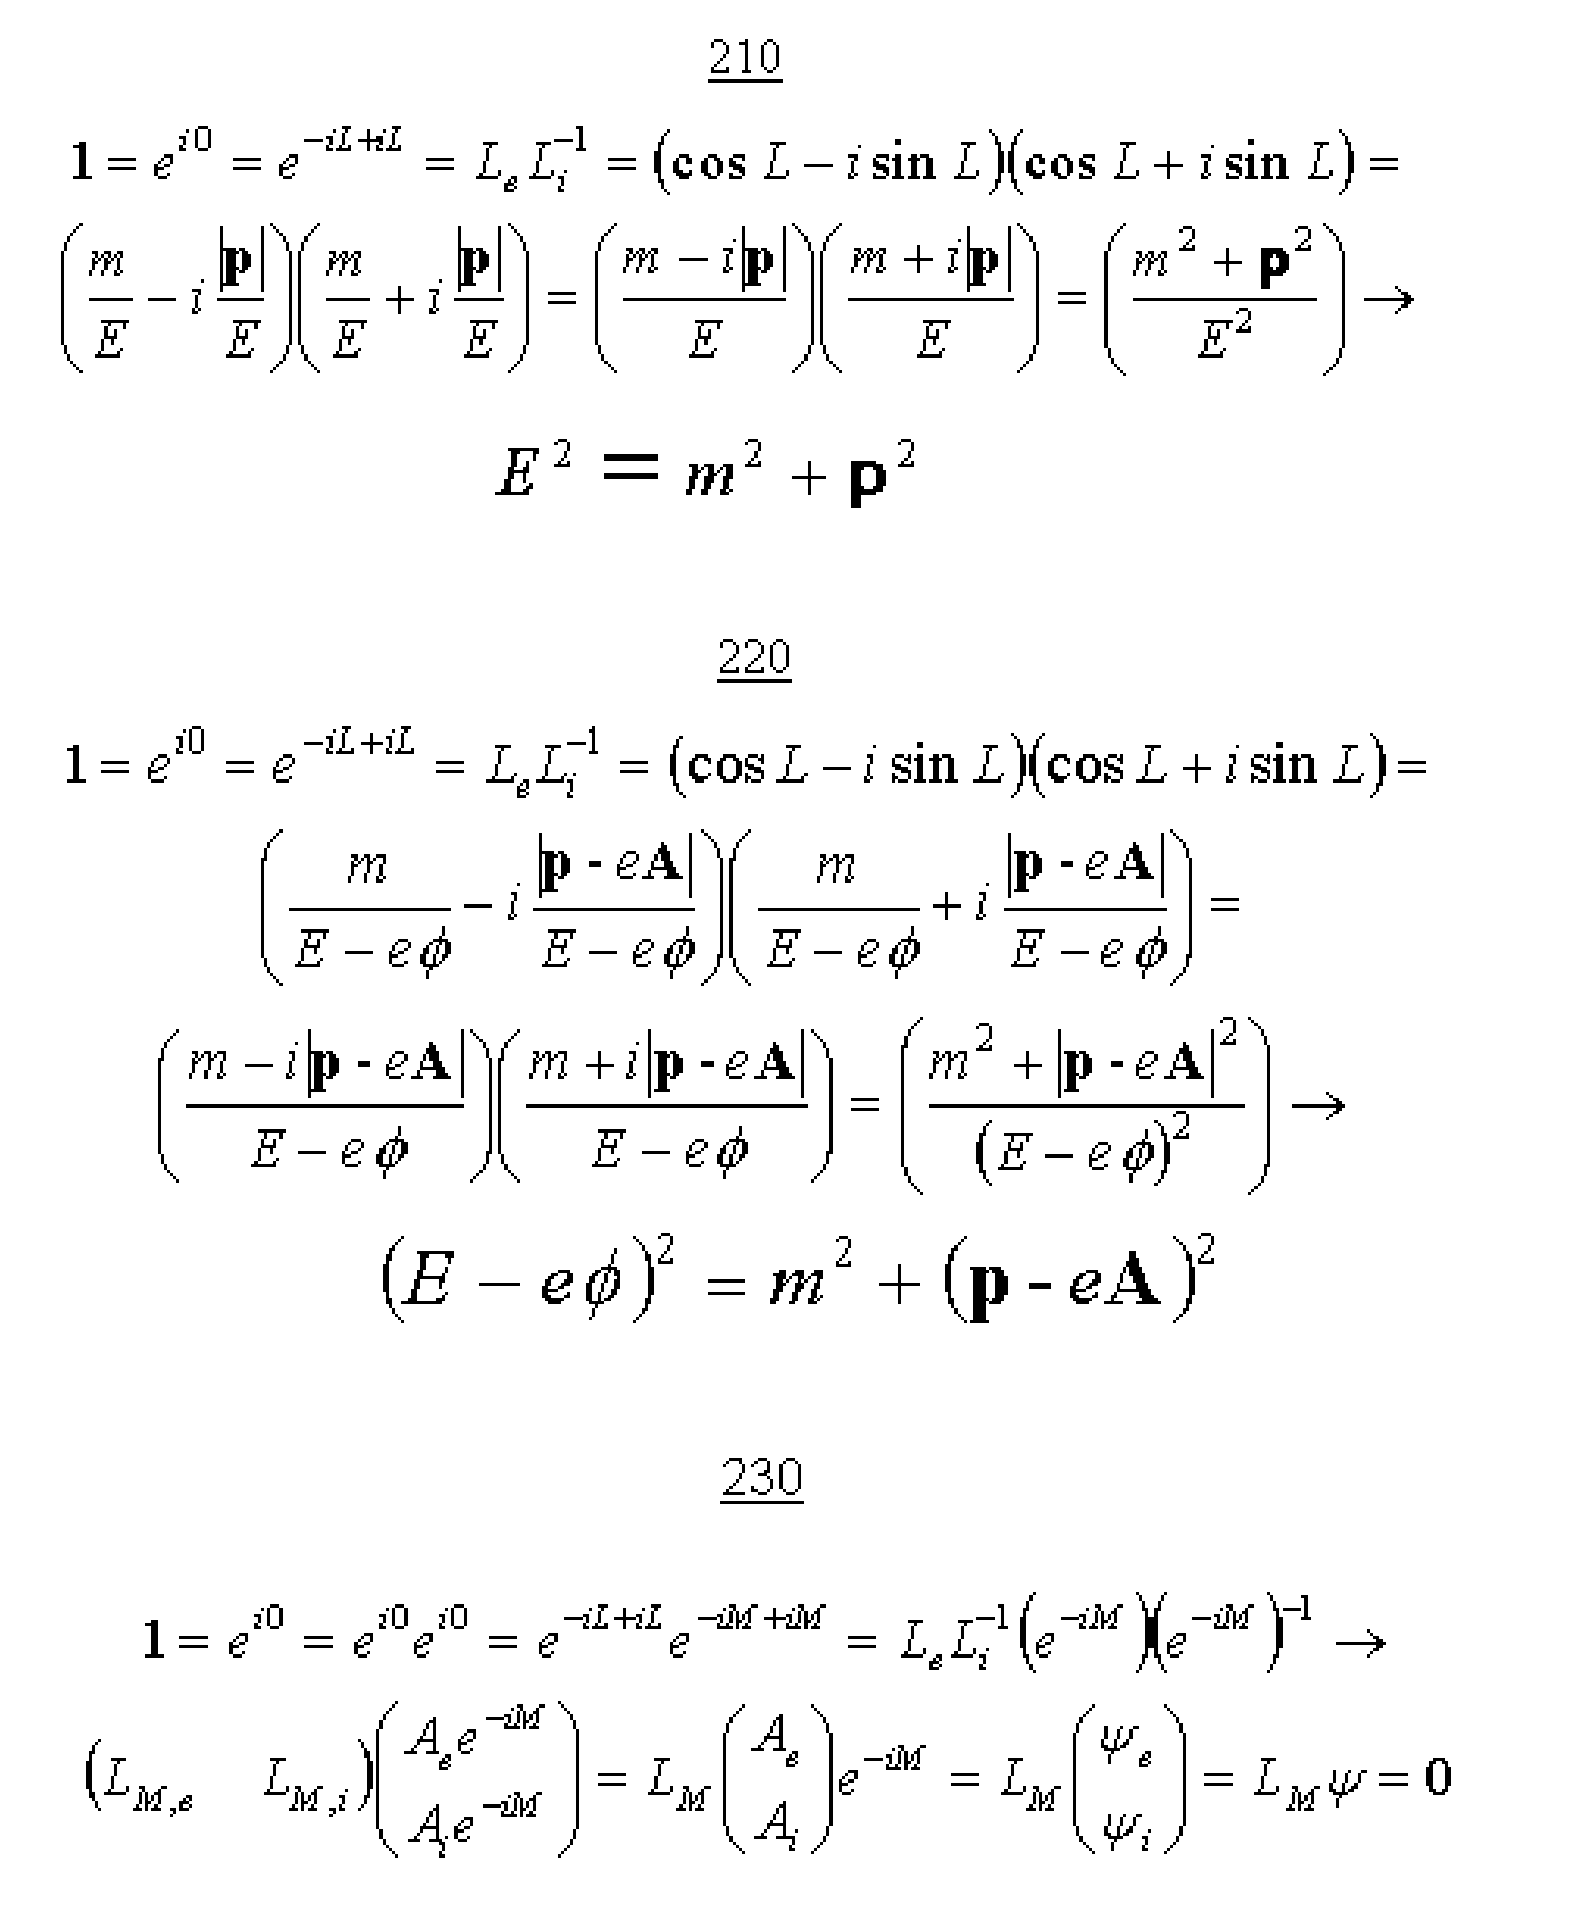 Prespacetime model for generating energy-momentum-mass relationship, self-referential matrix rules and elementary particles